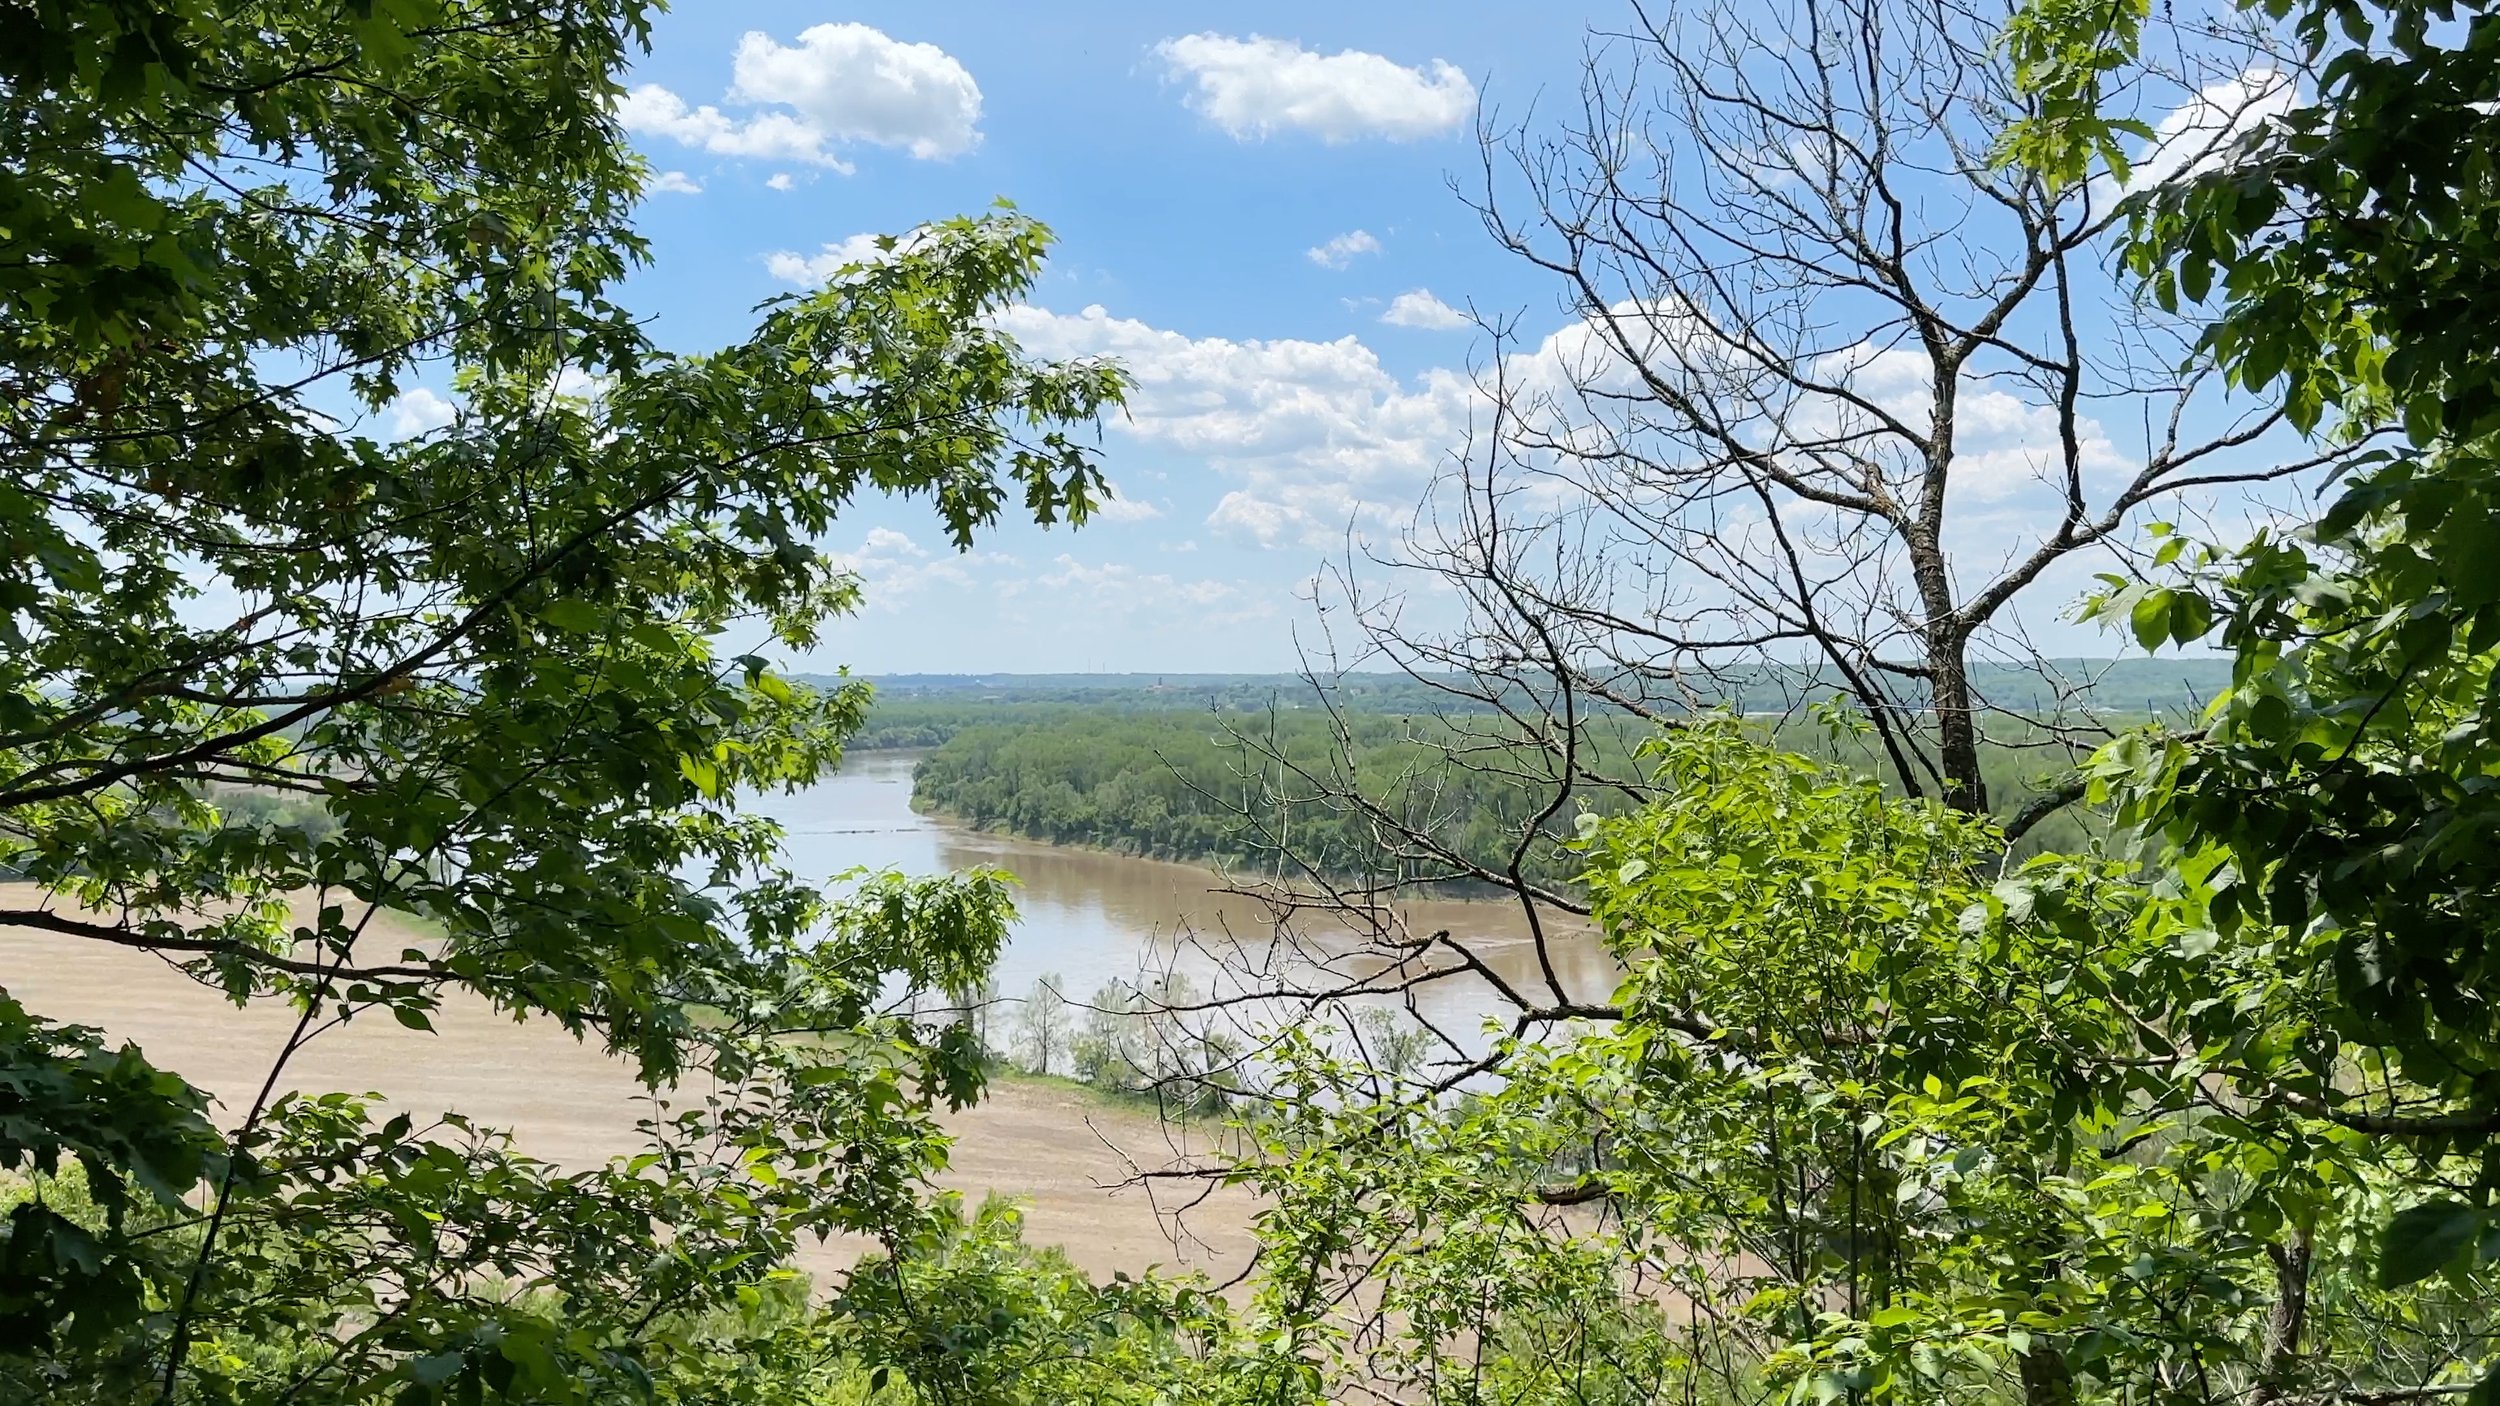 View of the Missouri River from West Ridge Trail